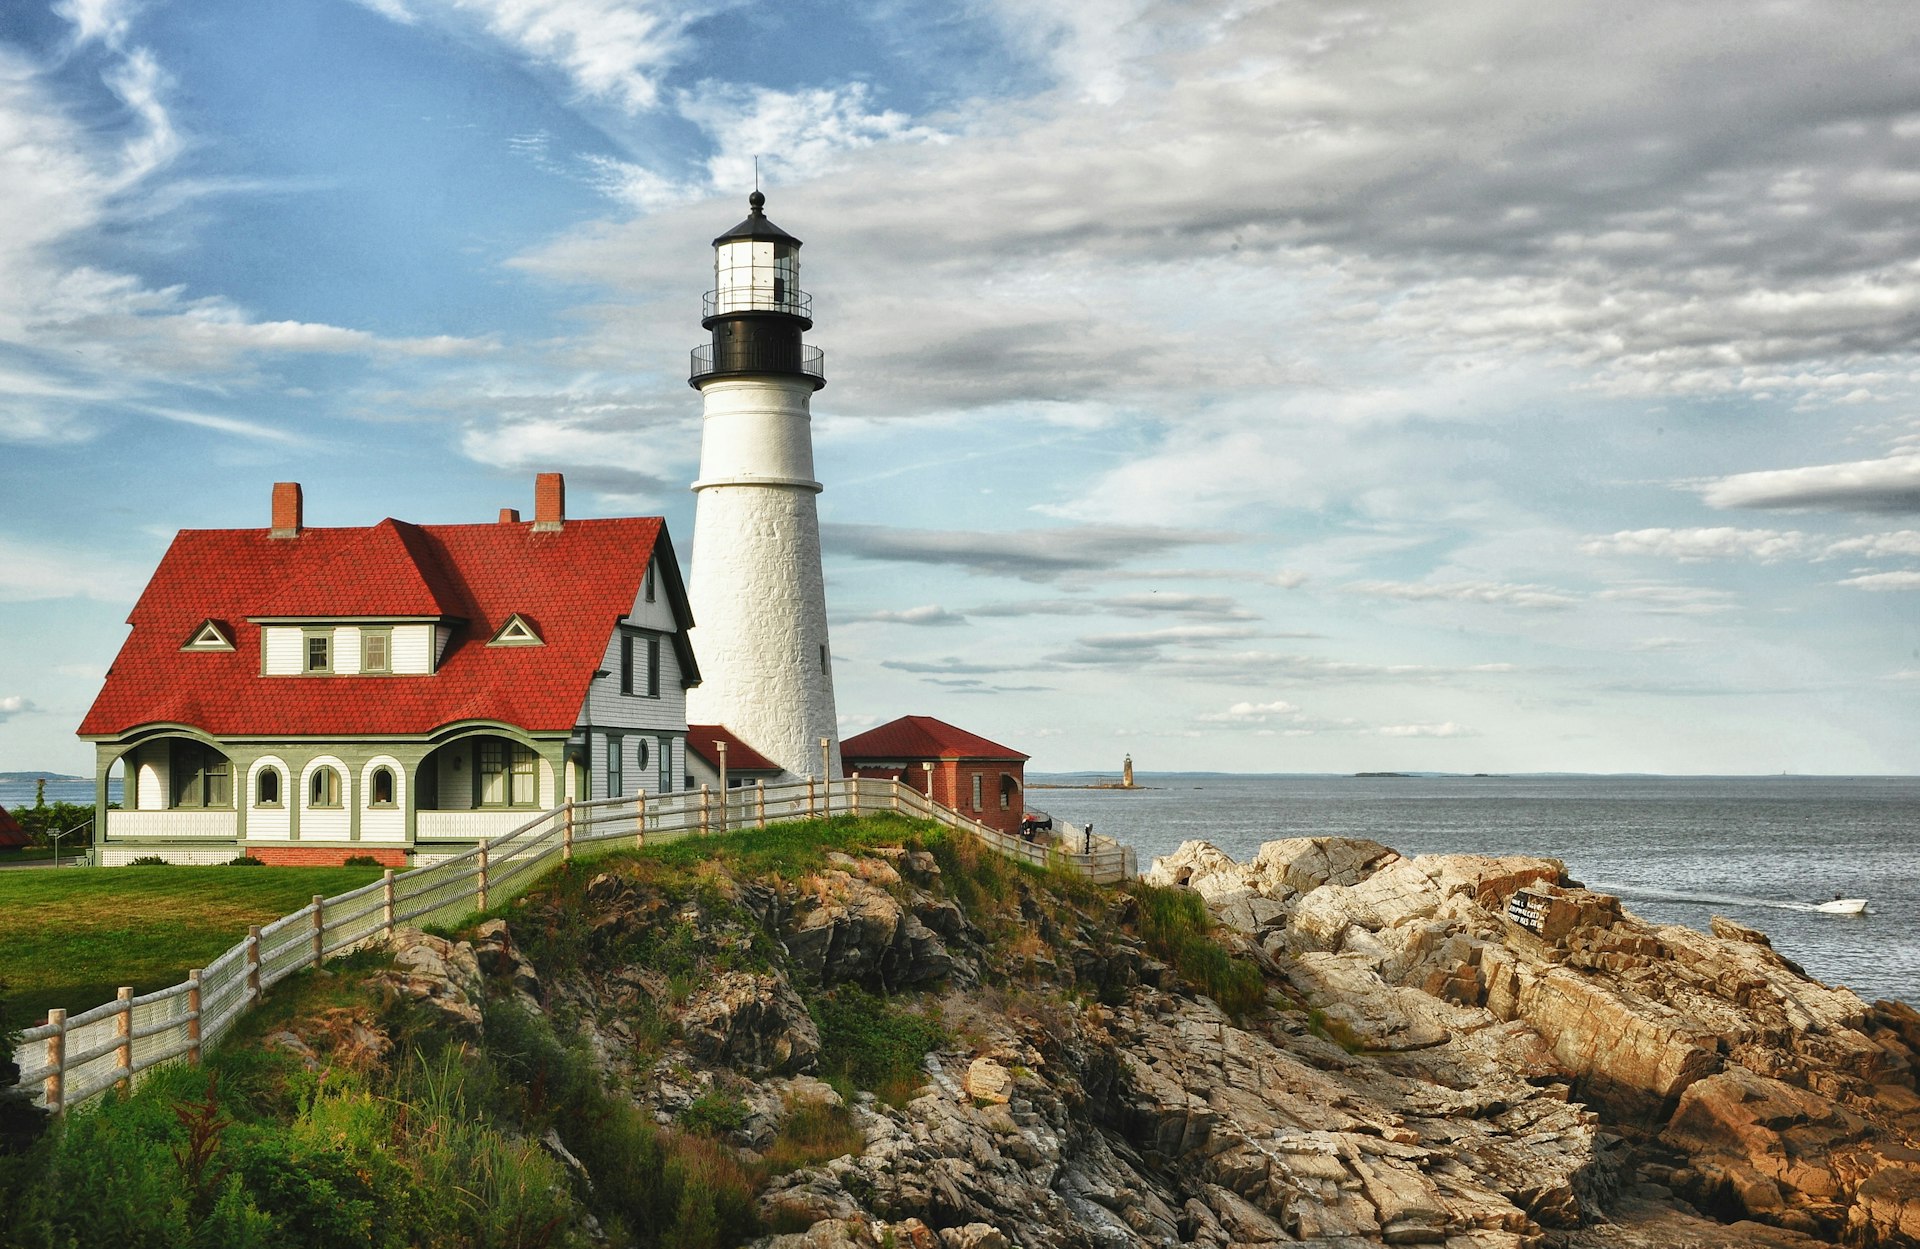 Full view of the Portland head lighthouse in Cape Elizabeth Maine